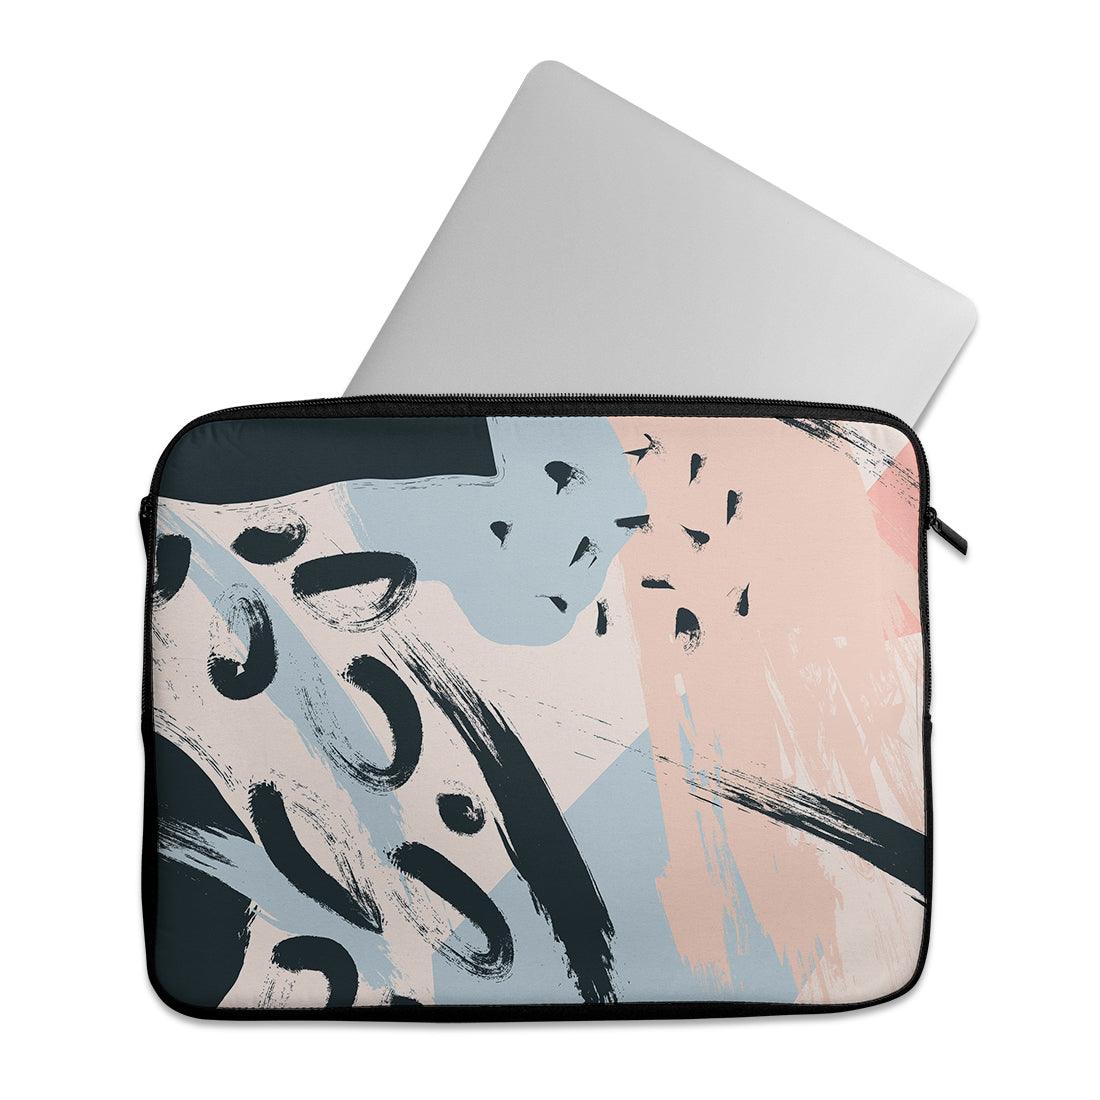 Laptop Sleeve Abstract Brushes